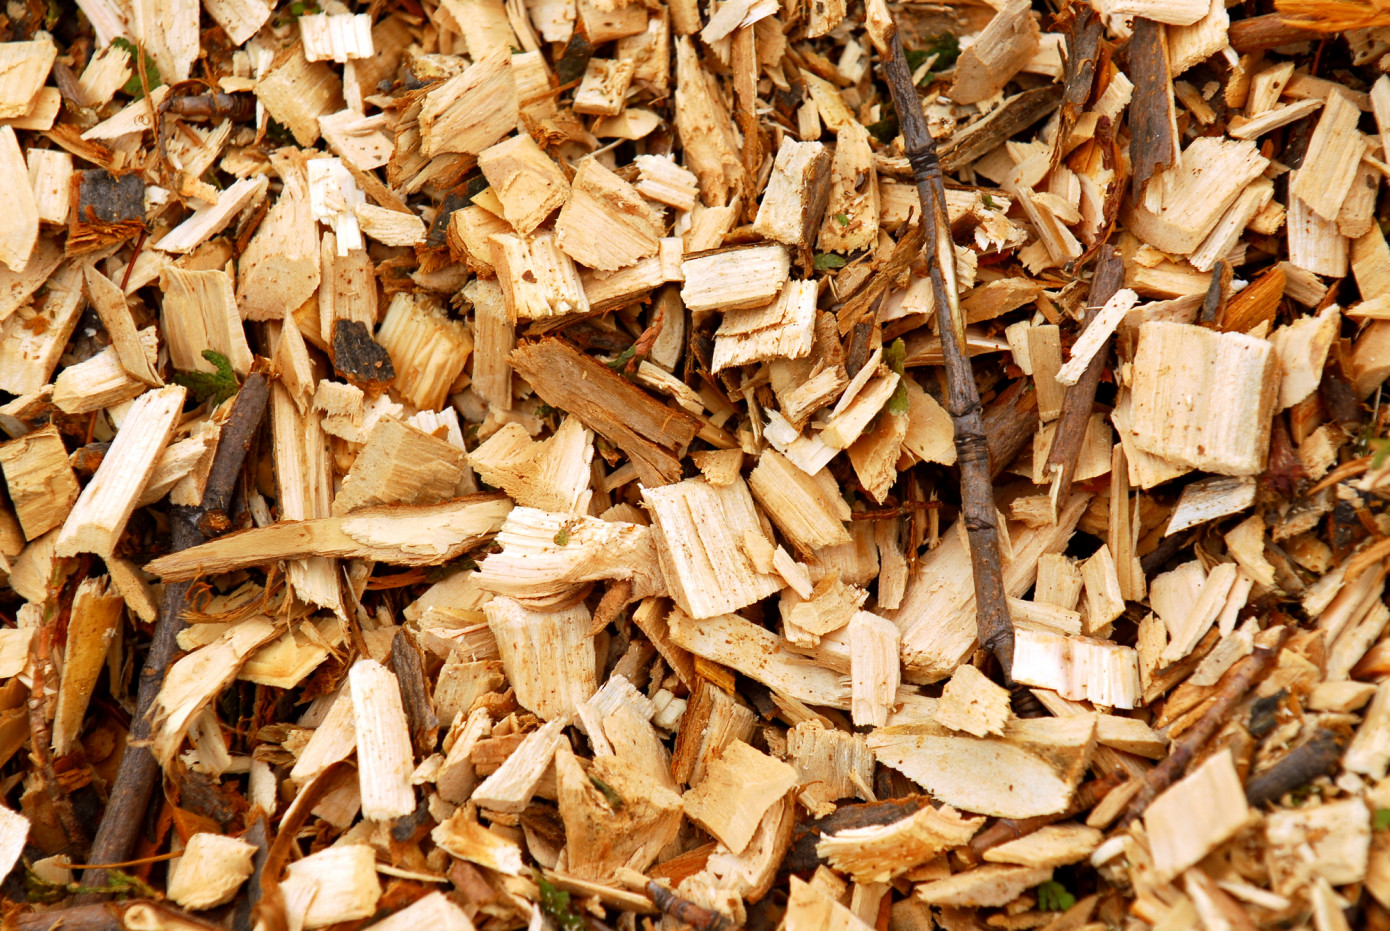 In May, price for wood chips exported from Australia to China gains 1.2%